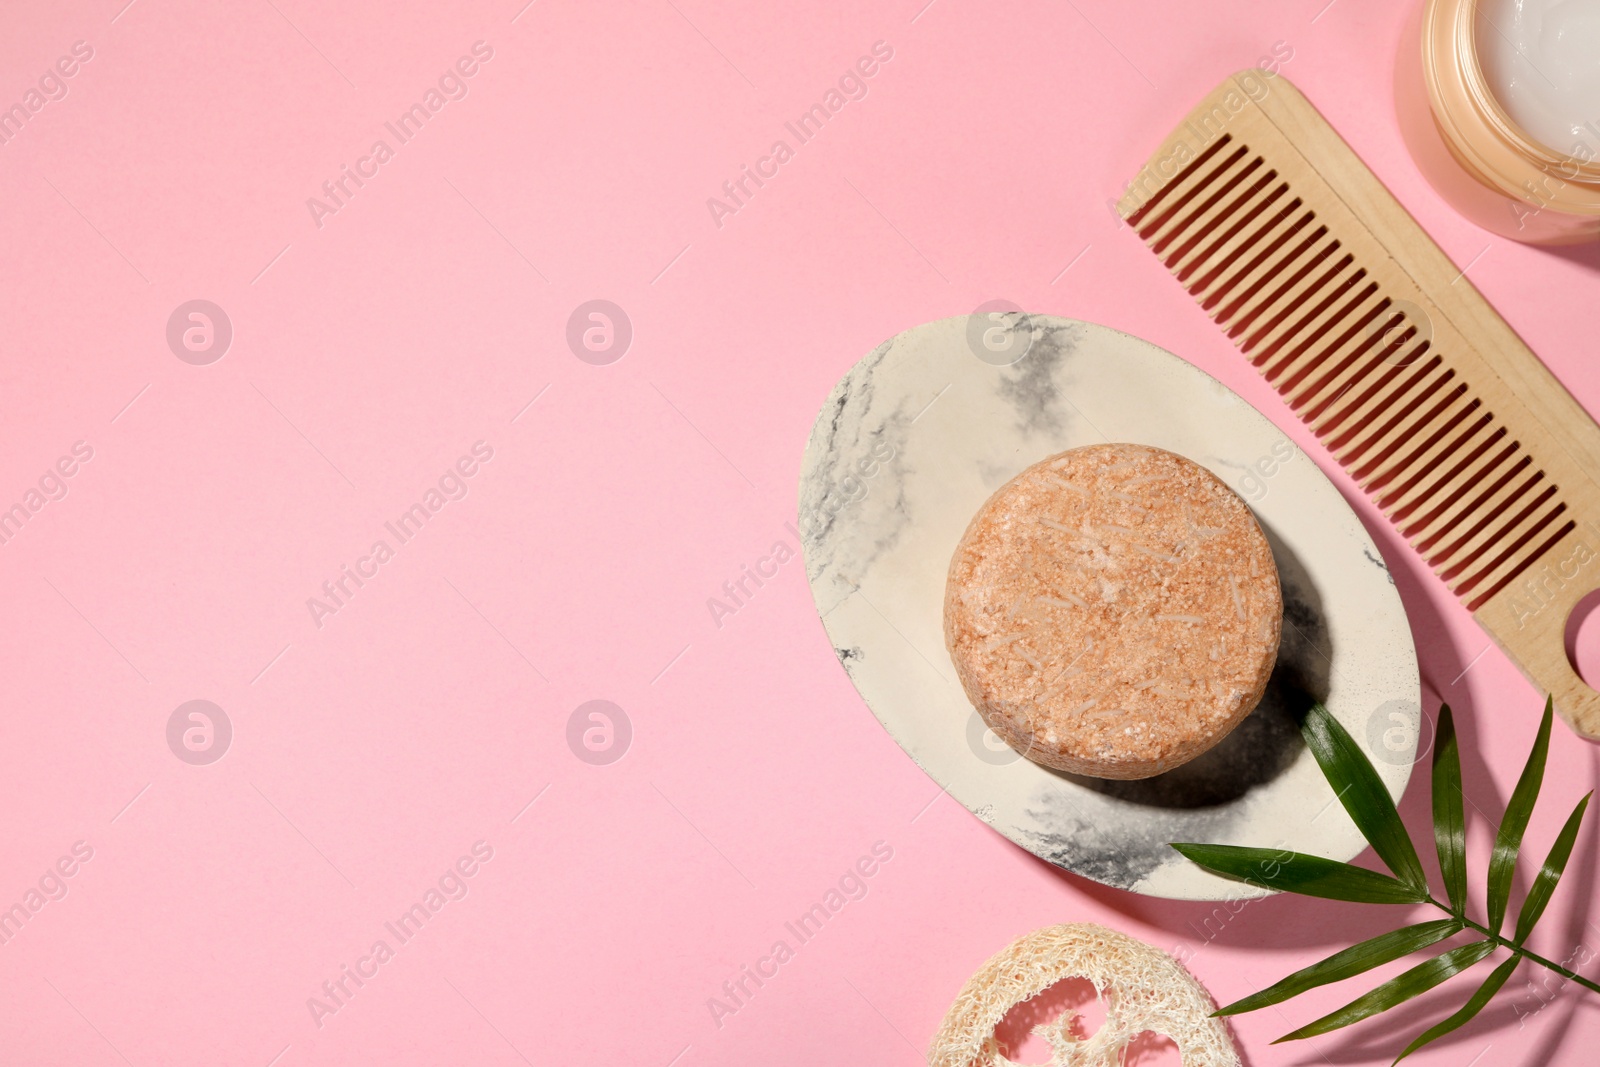 Photo of Flat lay composition of solid shampoo bar, leaf and comb on pink background. Space for text